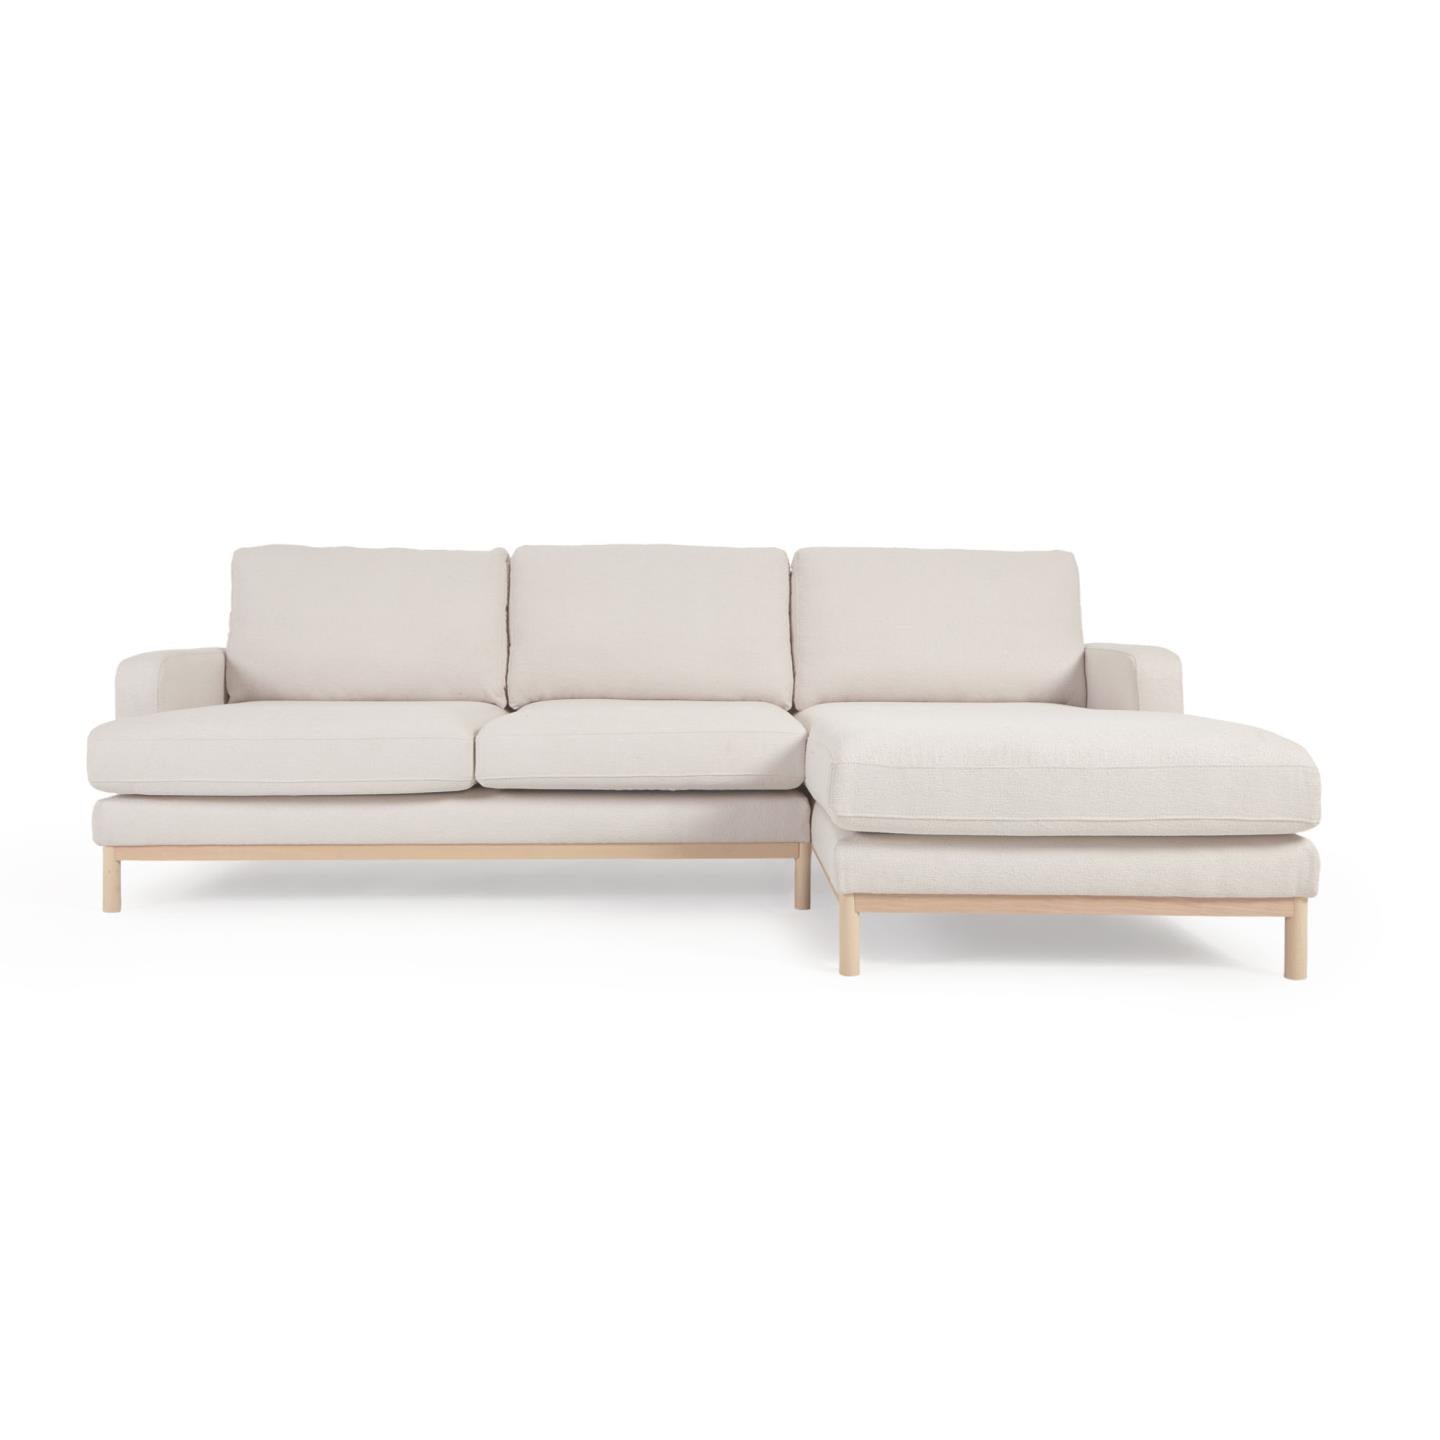 Mihaela 3 seater sofa with right-hand chaise longue in white fleece, 264 cm